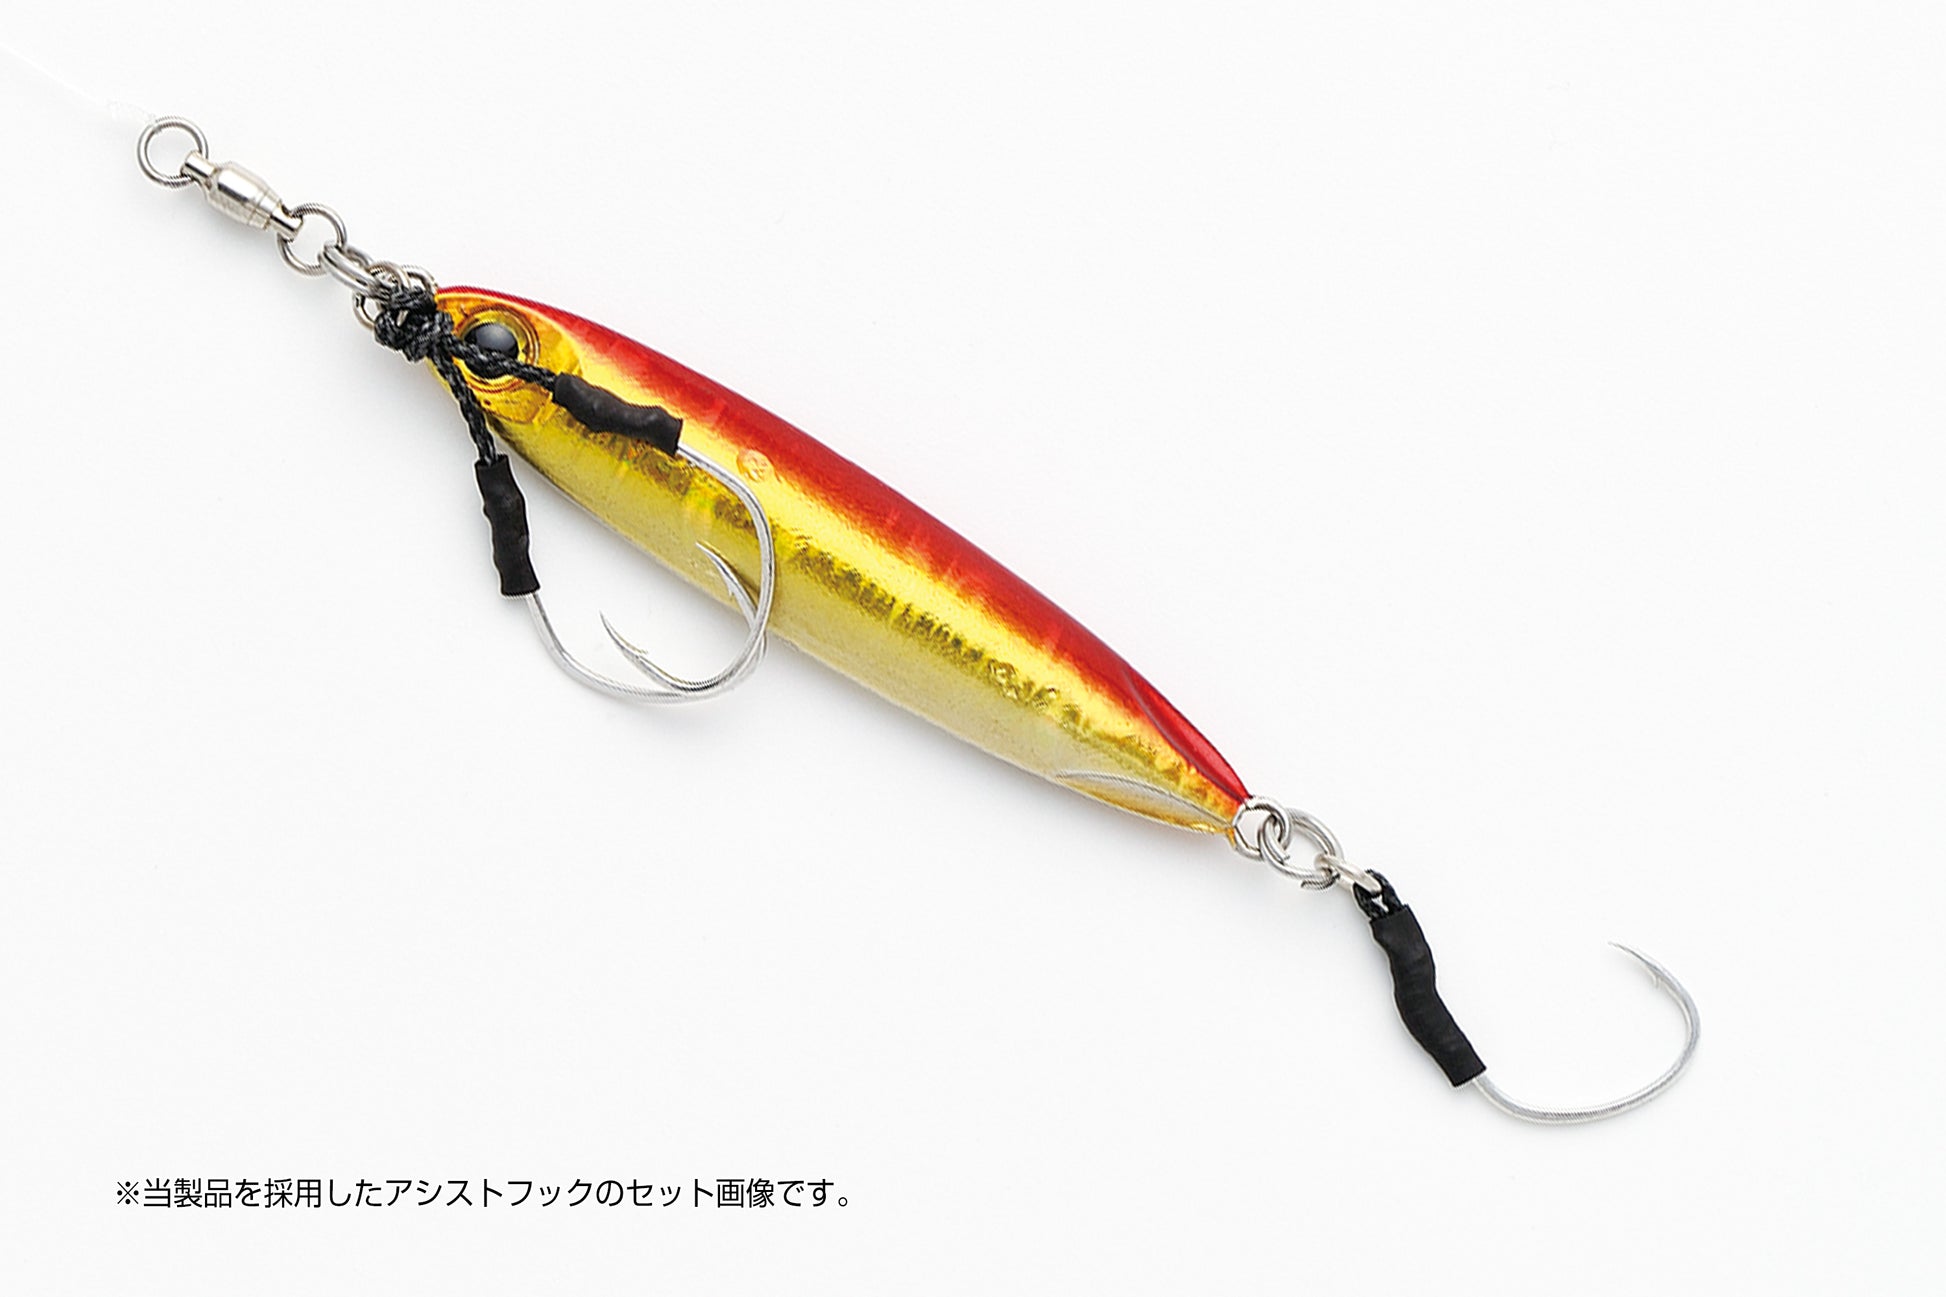 Decoy Pike Propack (AS-03P)